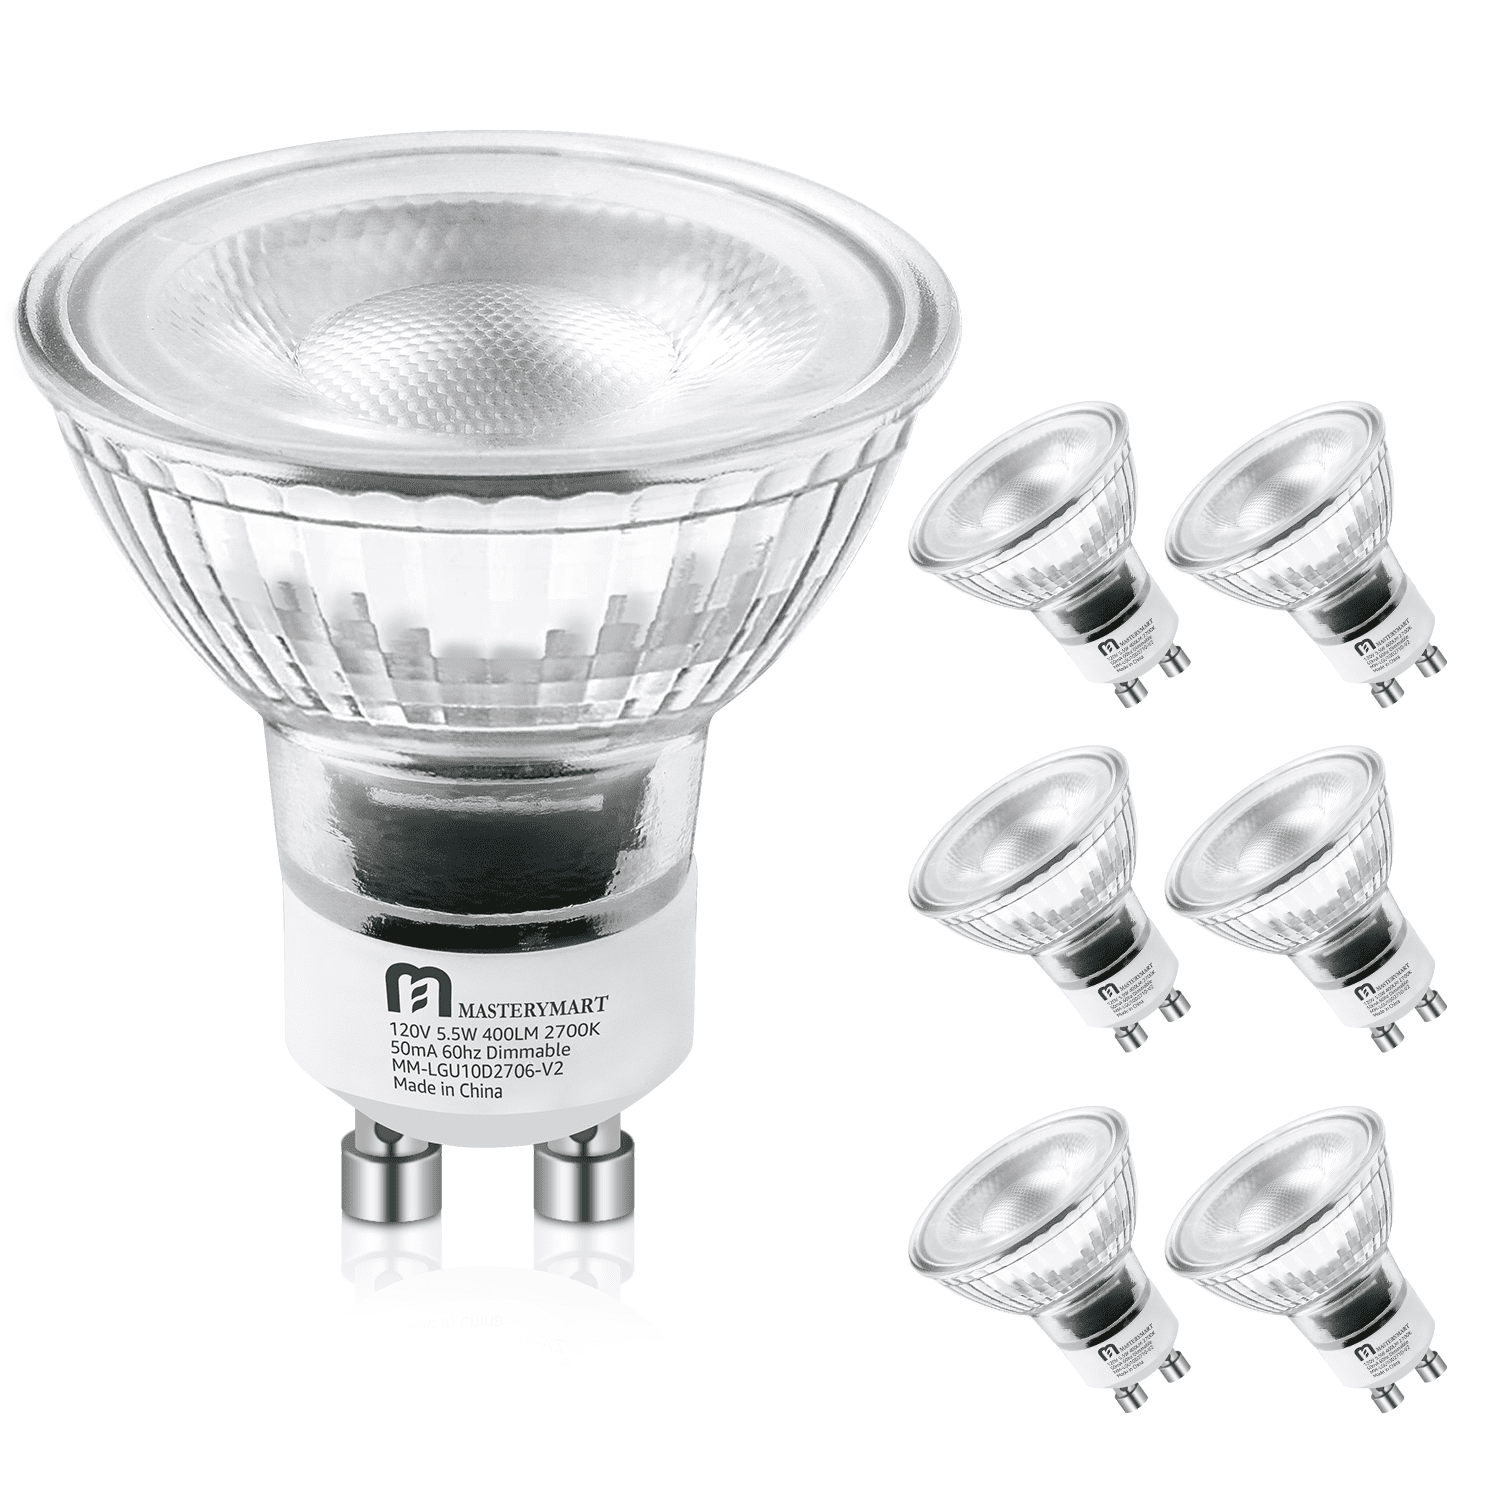 Mastery Mart 2700K White, Bulbs, Soft 400LM, LED Light 25,000hrs, 6-pack Lasts GU10 Equivalent, 50W Dimmable